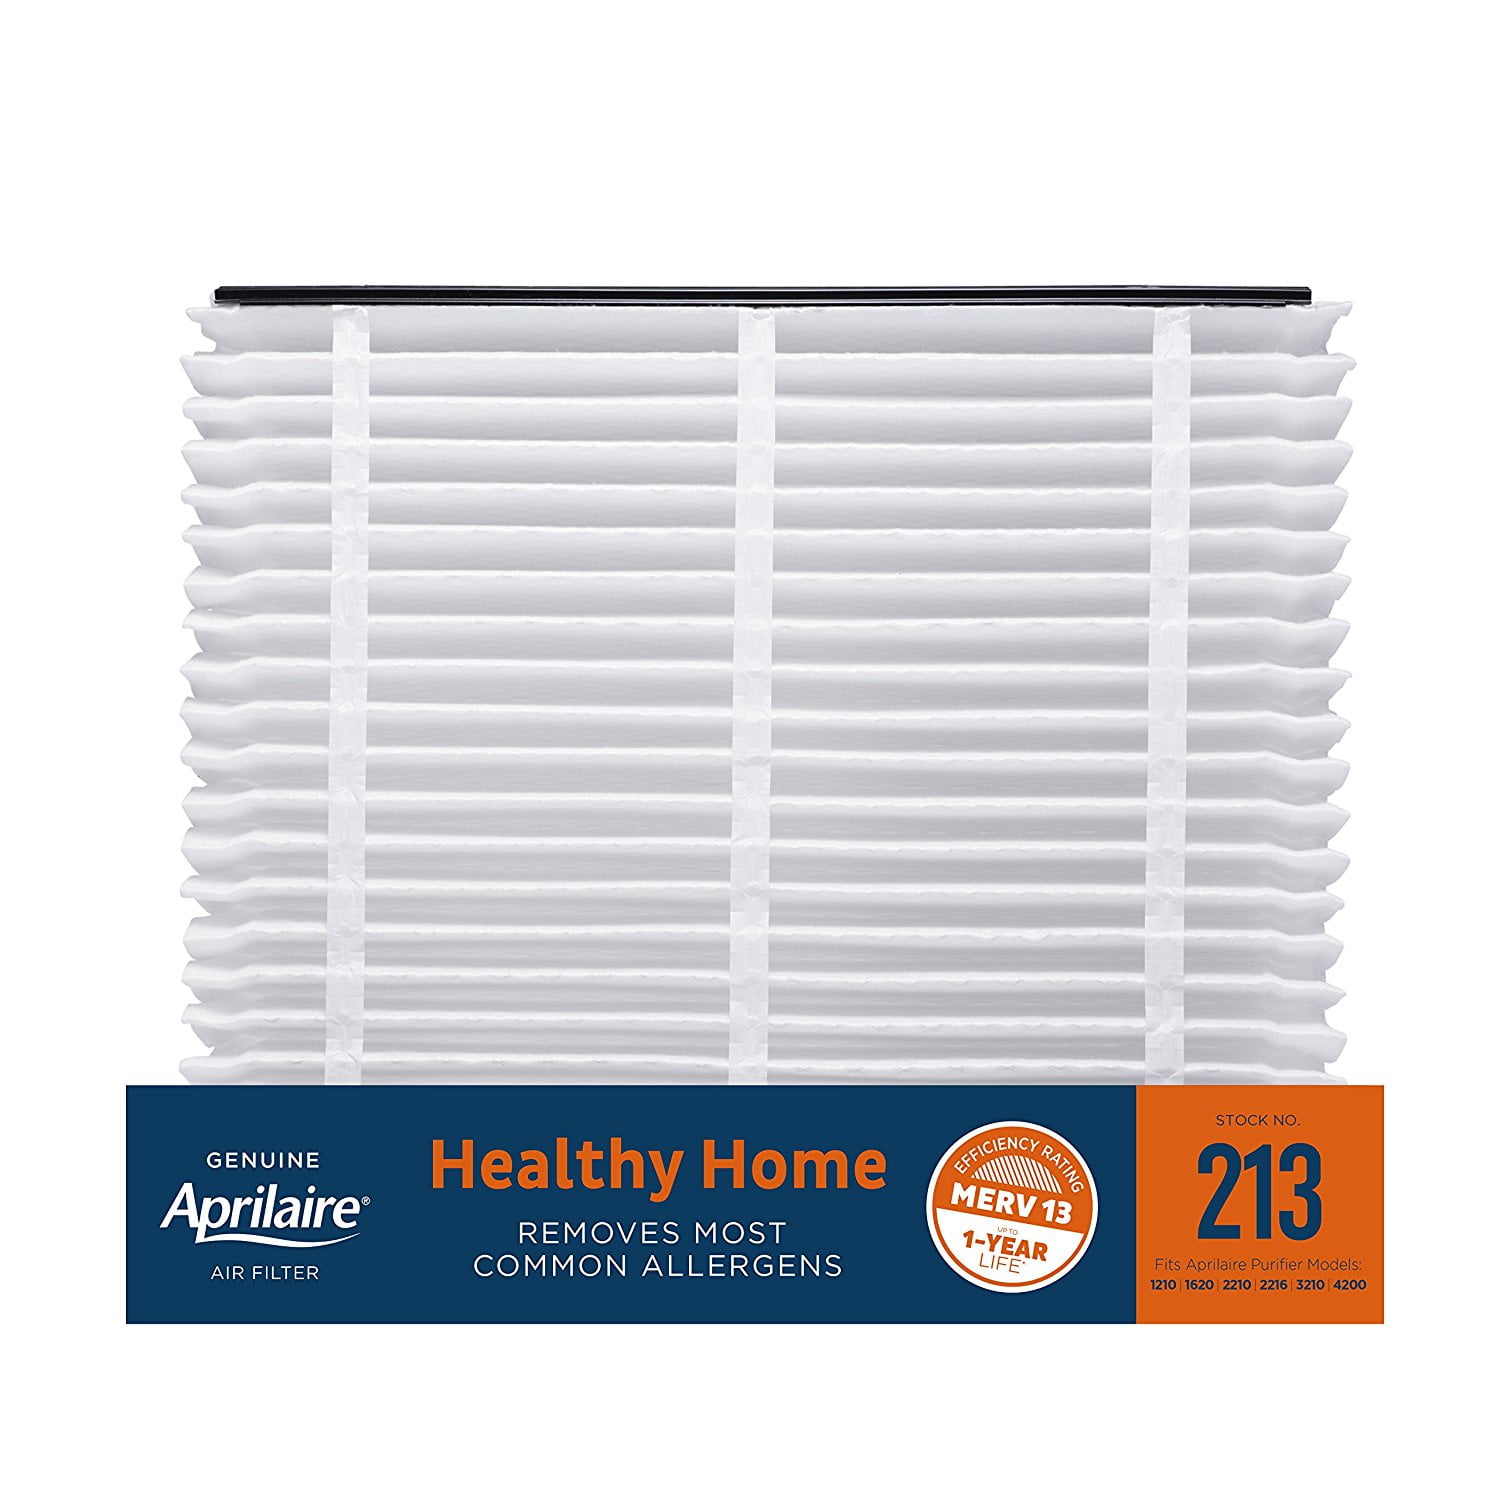 Aprilaire 213 Replacement Air Filter for Aprilaire Whole Home Air Purifiers NEW 